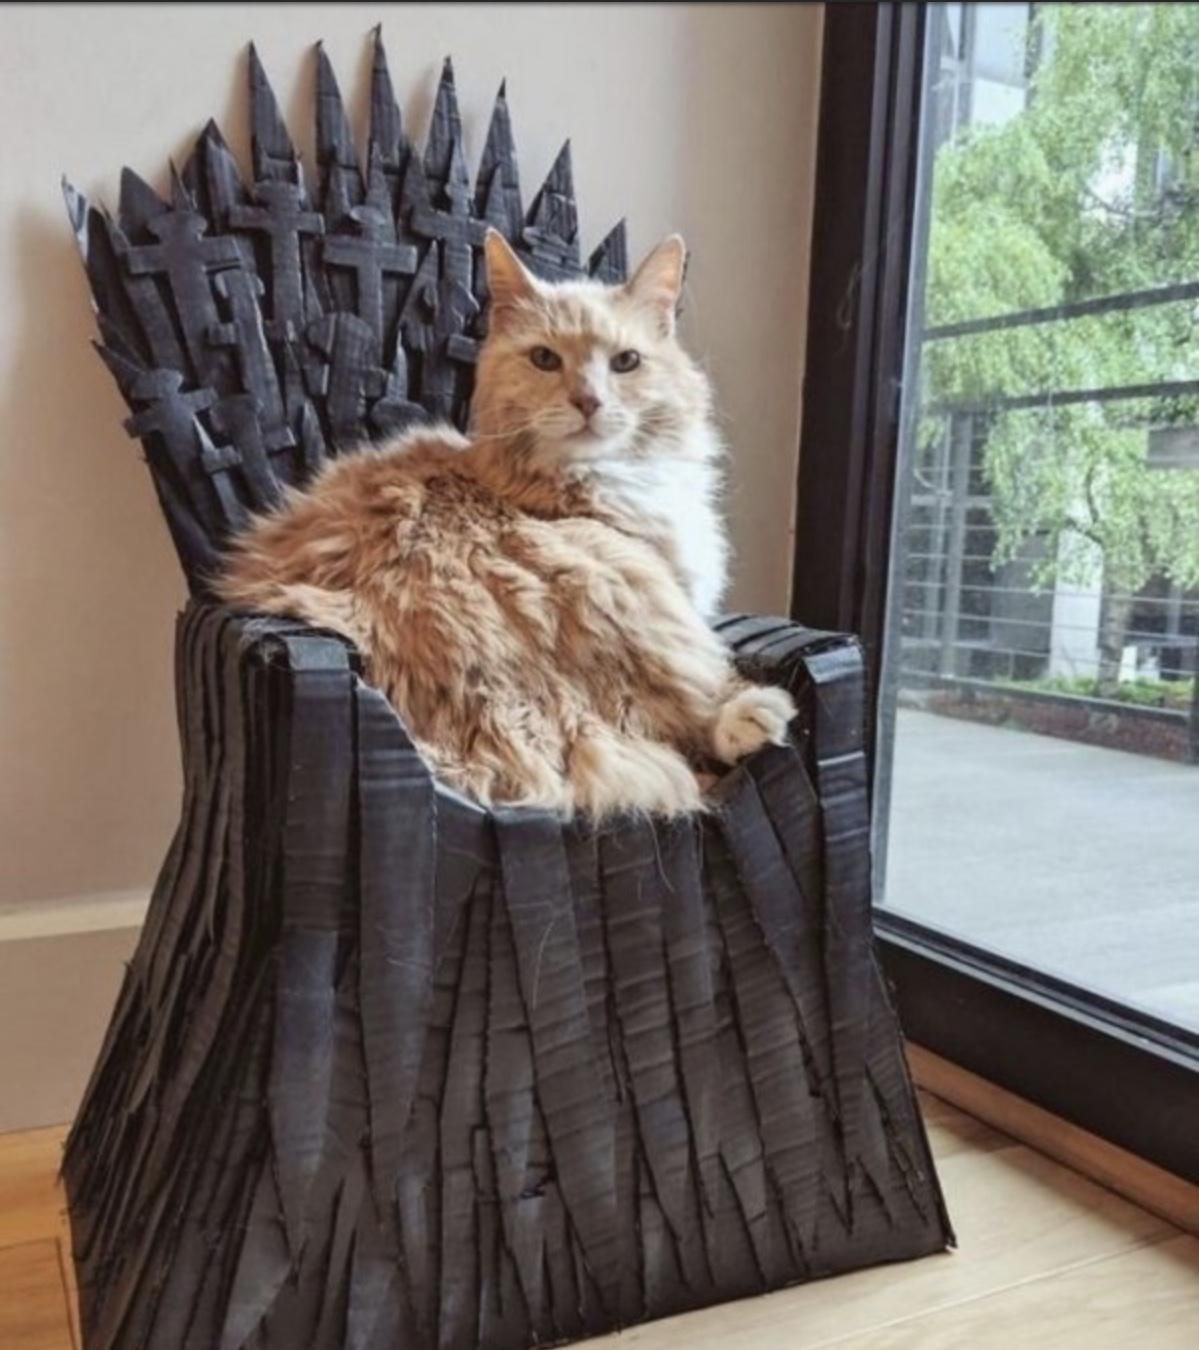 The True King of the Iron Throne